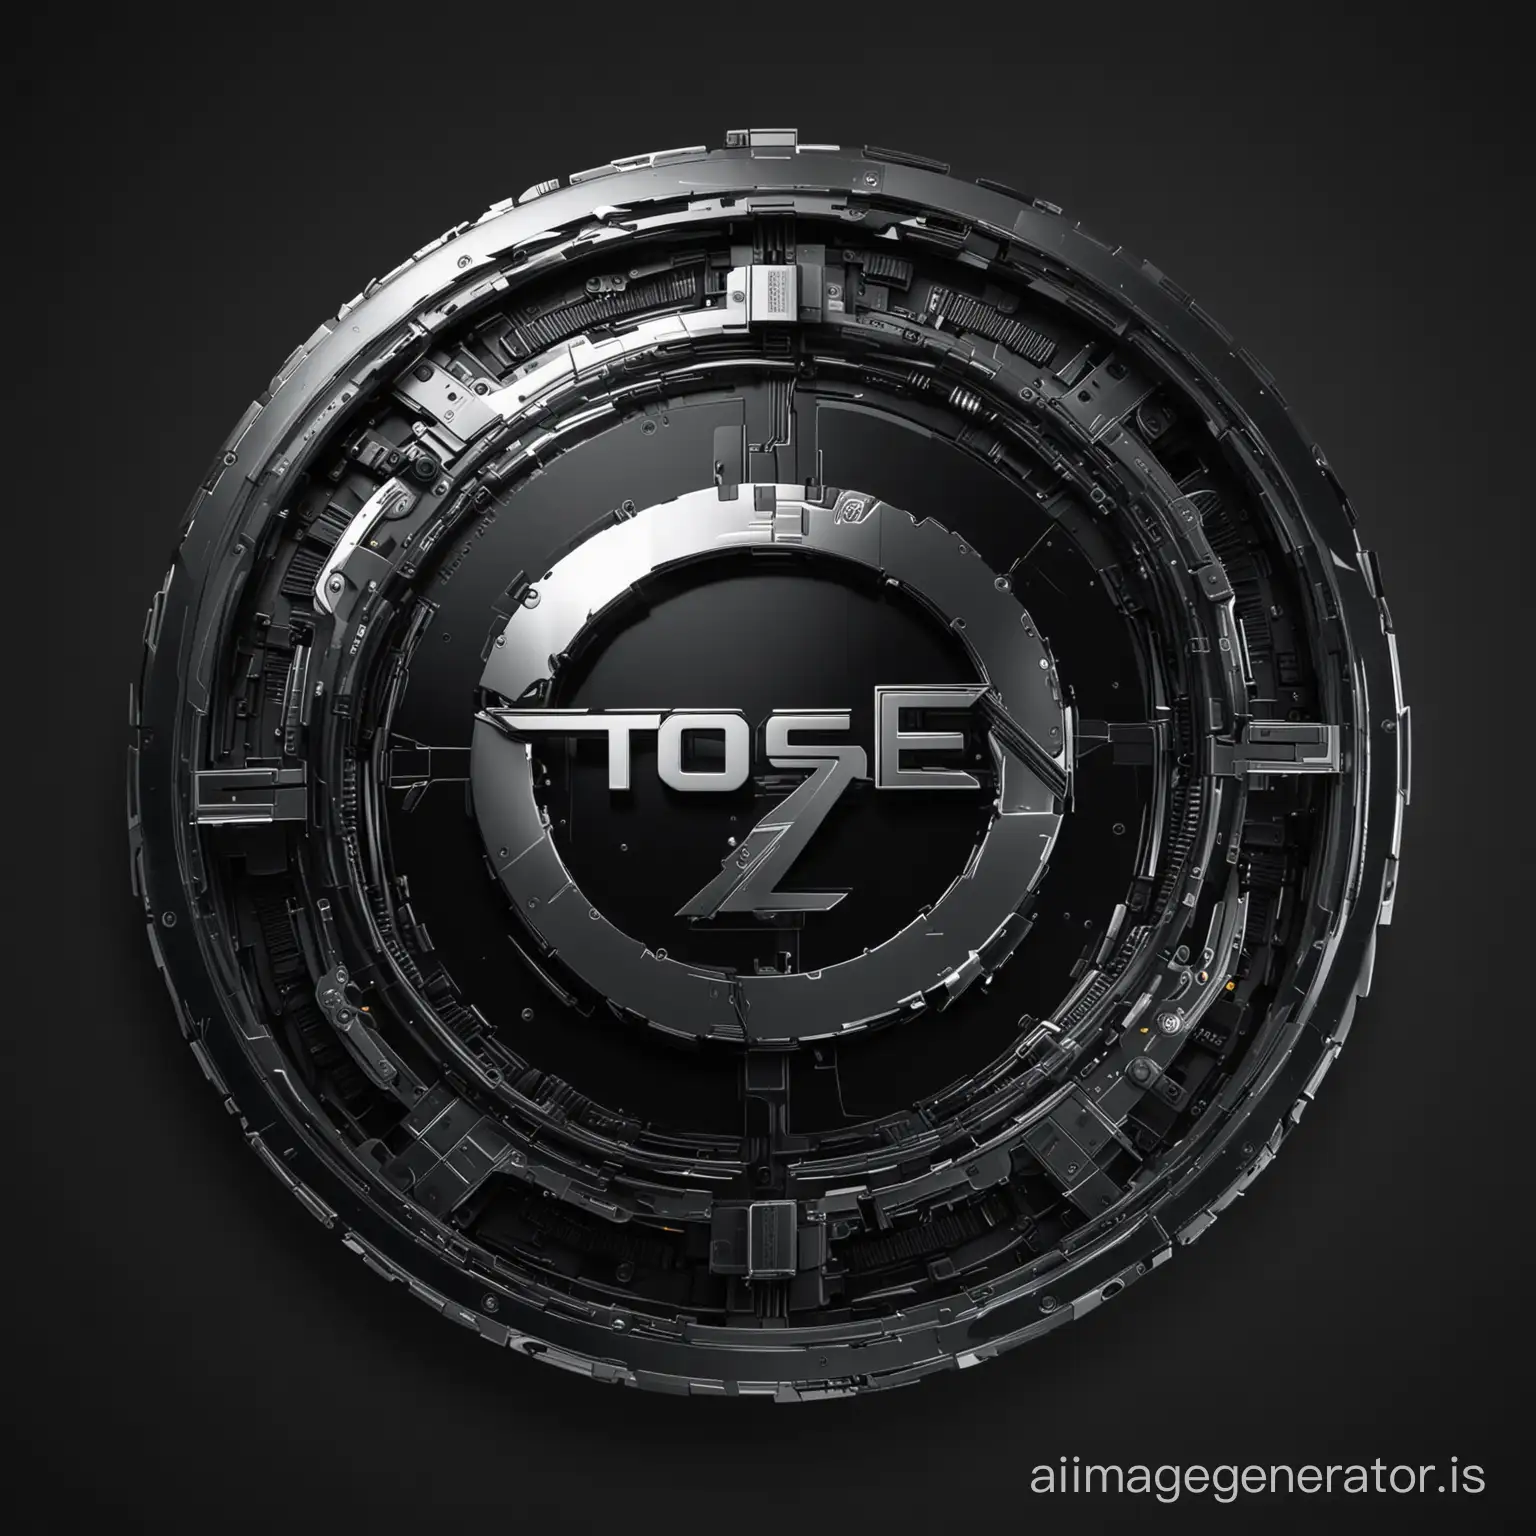 Cyberpunk logo on circular. Techy and black/chrome. Text 'ToSe7en' in the middle